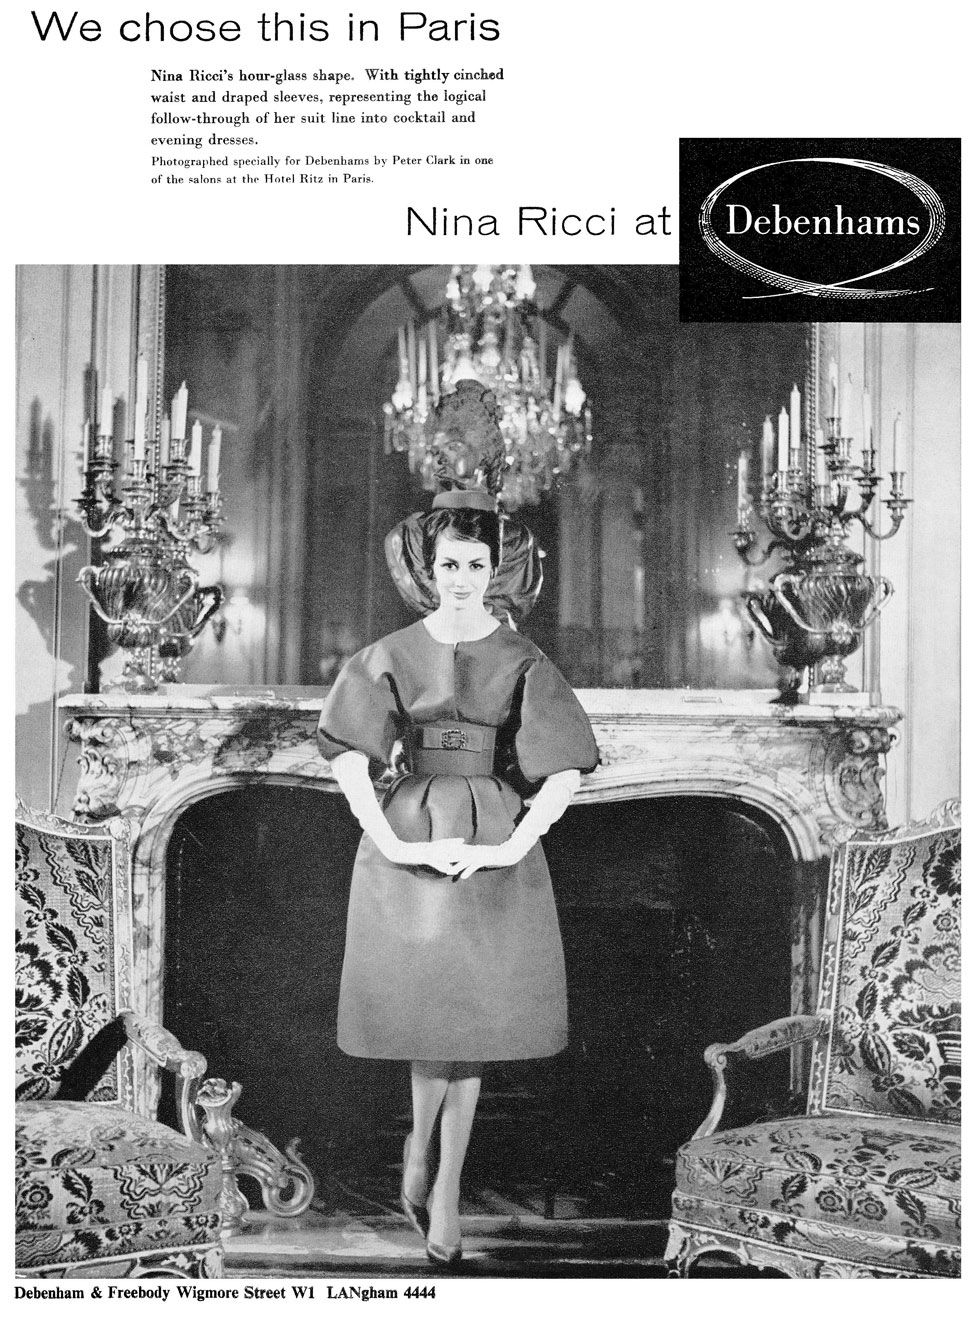 An advert for a fashion brand showing a woman in a dress standing in front of an elegant fireplace